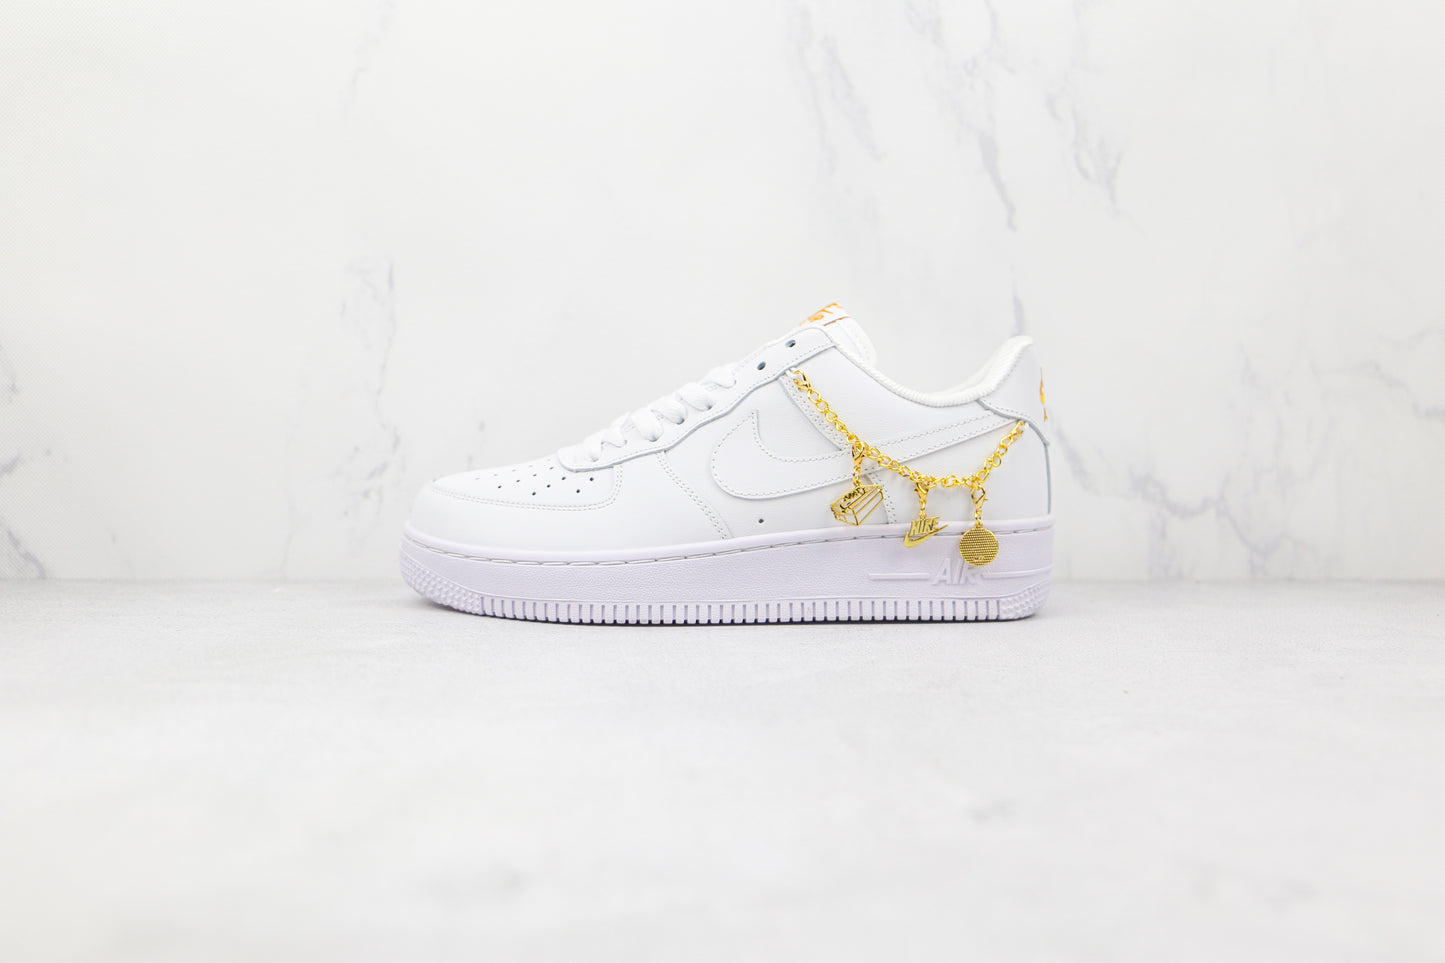 Nike Air Force 1 Low LX White Pendant